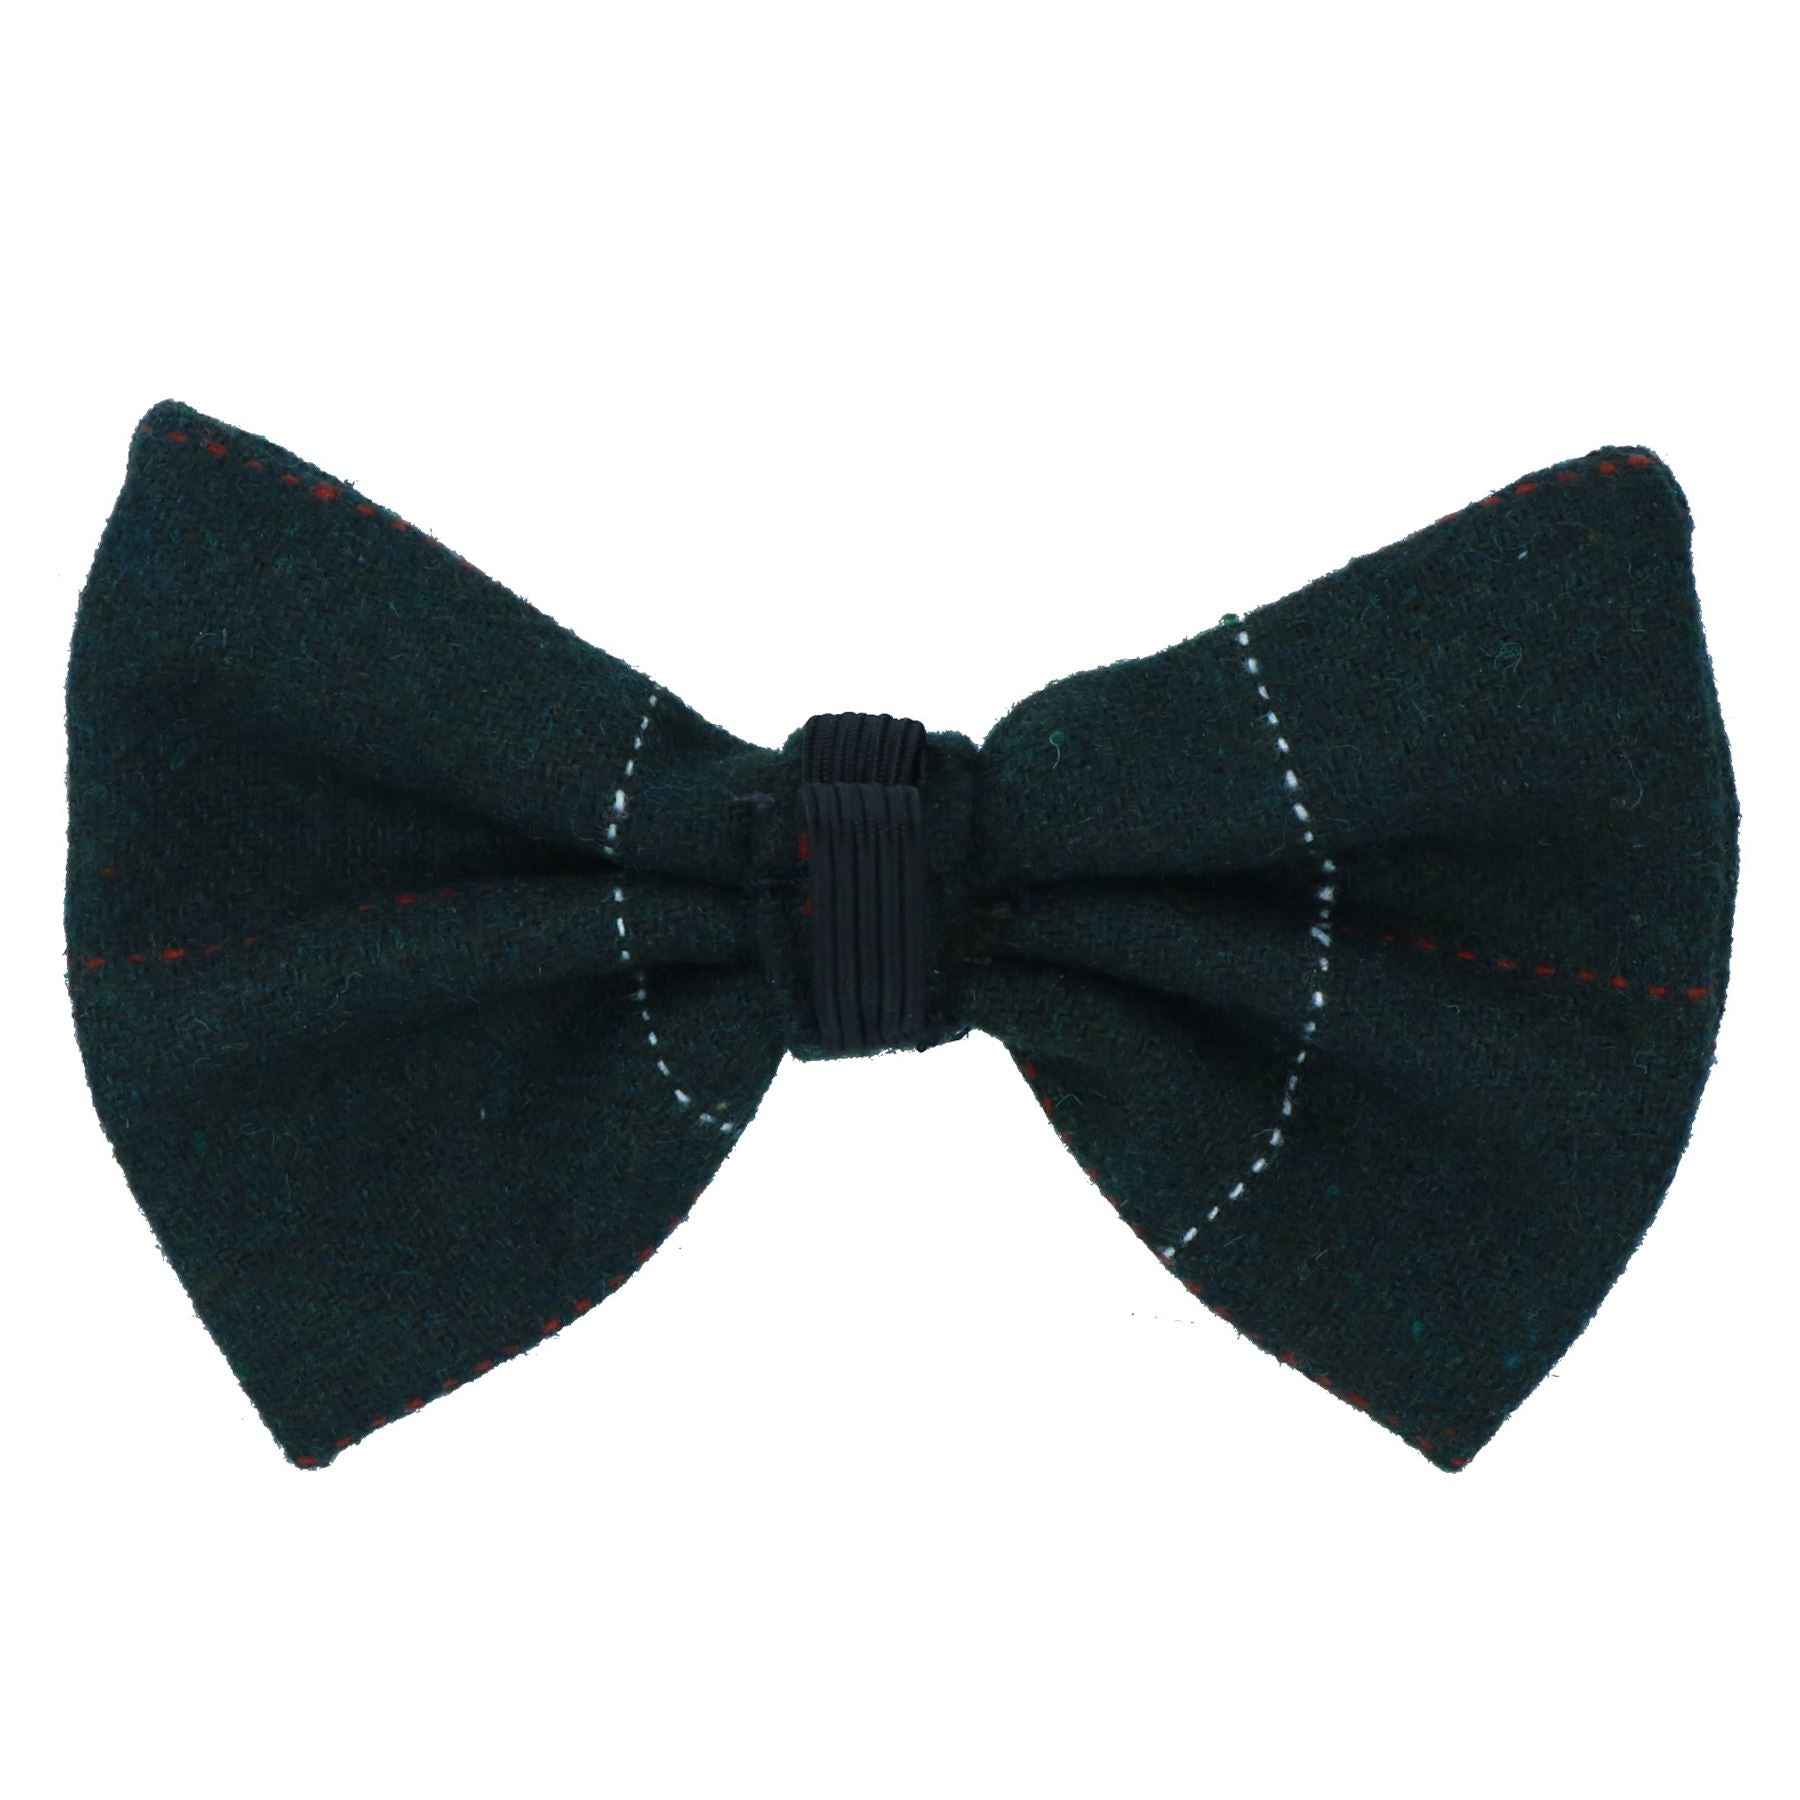 One Size Stylish Green Tweed Dog Bow Tie For Fashionable Dogs With Collar Loop